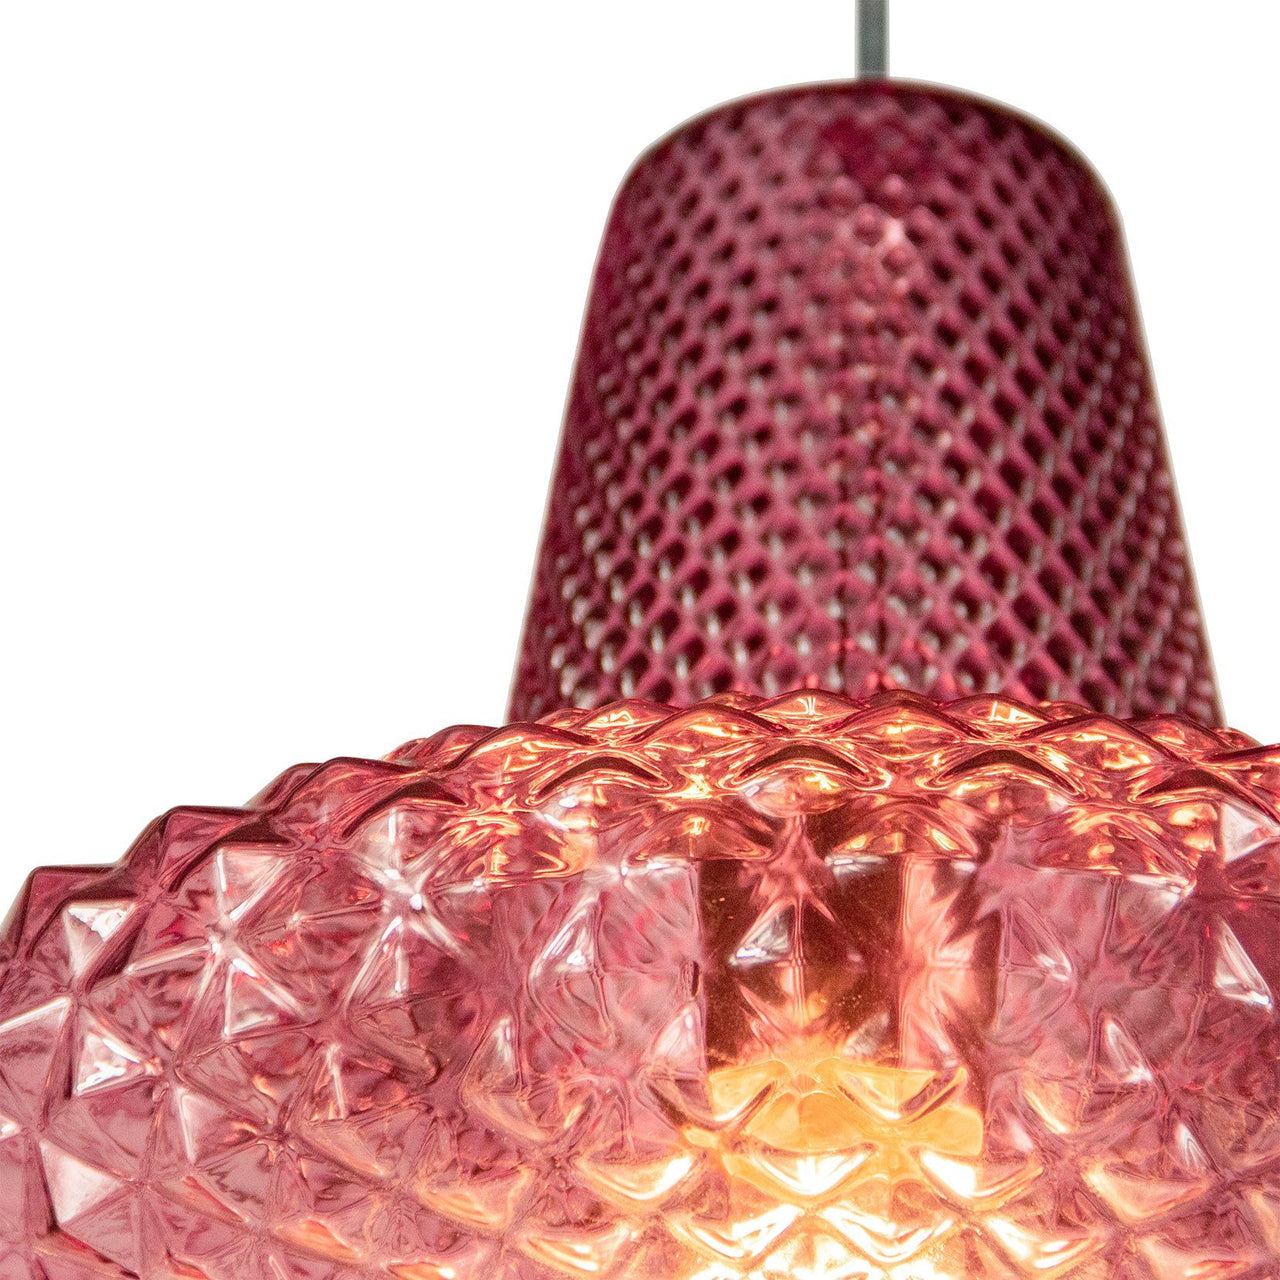 Jarvis Vintage Pendant Light Fixture with Pink Glass Shade, Home Decor, Overhead Ceiling Lighting for Foyer, Living or Dining Room, or Reading Nook Pendant Lighting Canyon Home 